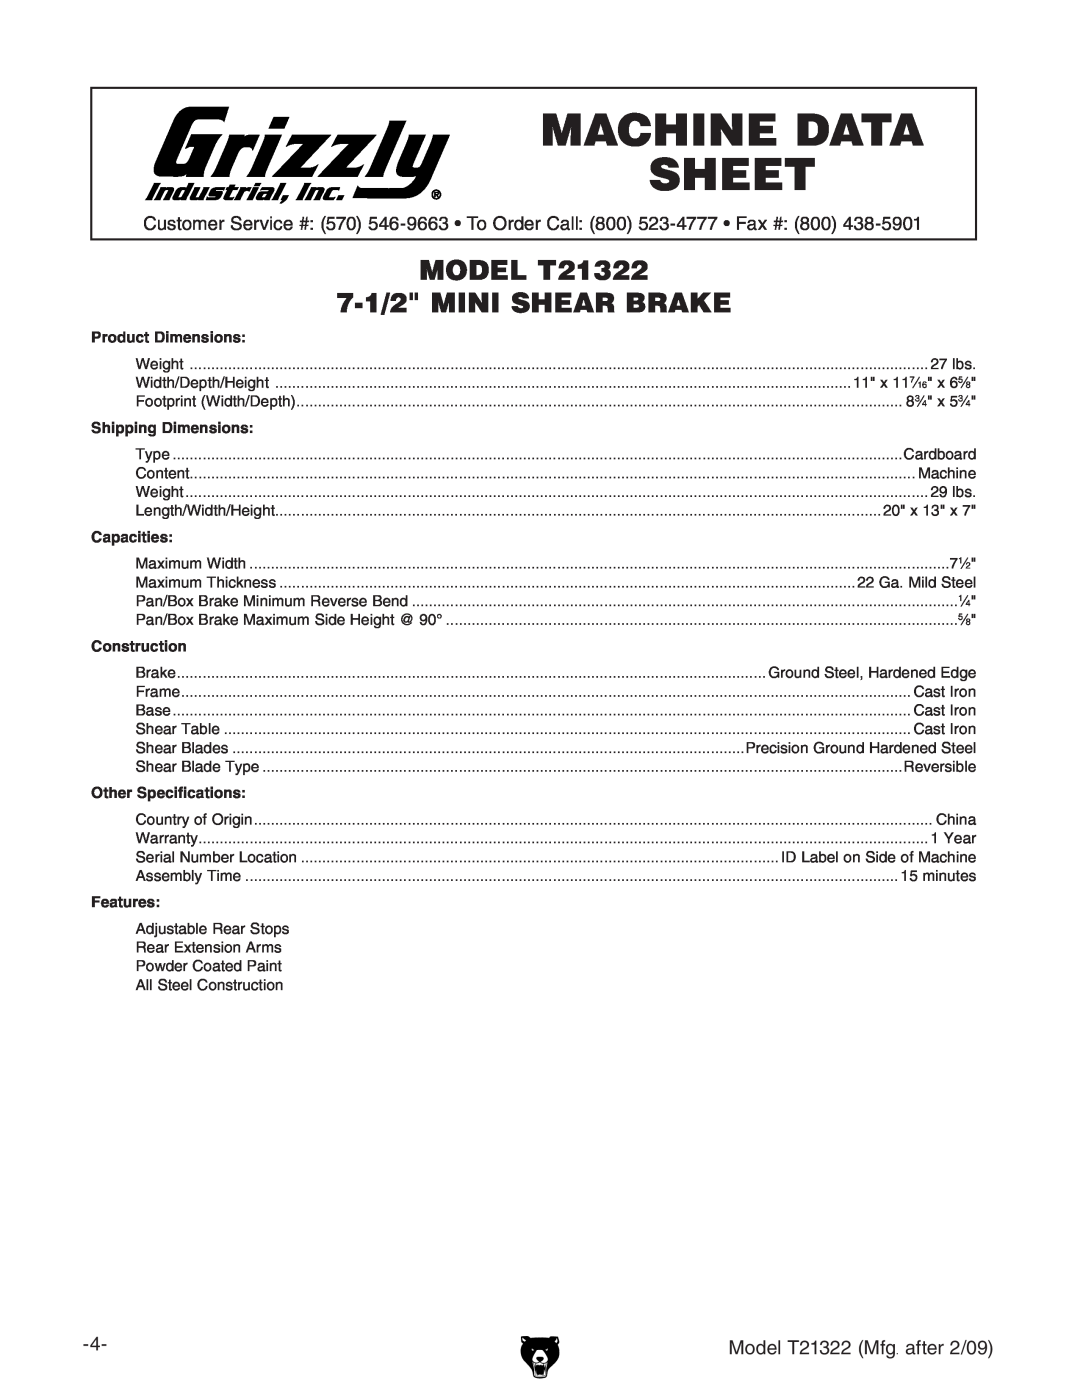 Grizzly Machine Data Sheet, MODEL T21322 7-1/2 MINI SHEAR BRAKE, Product Dimensions, Shipping Dimensions, Capacities 